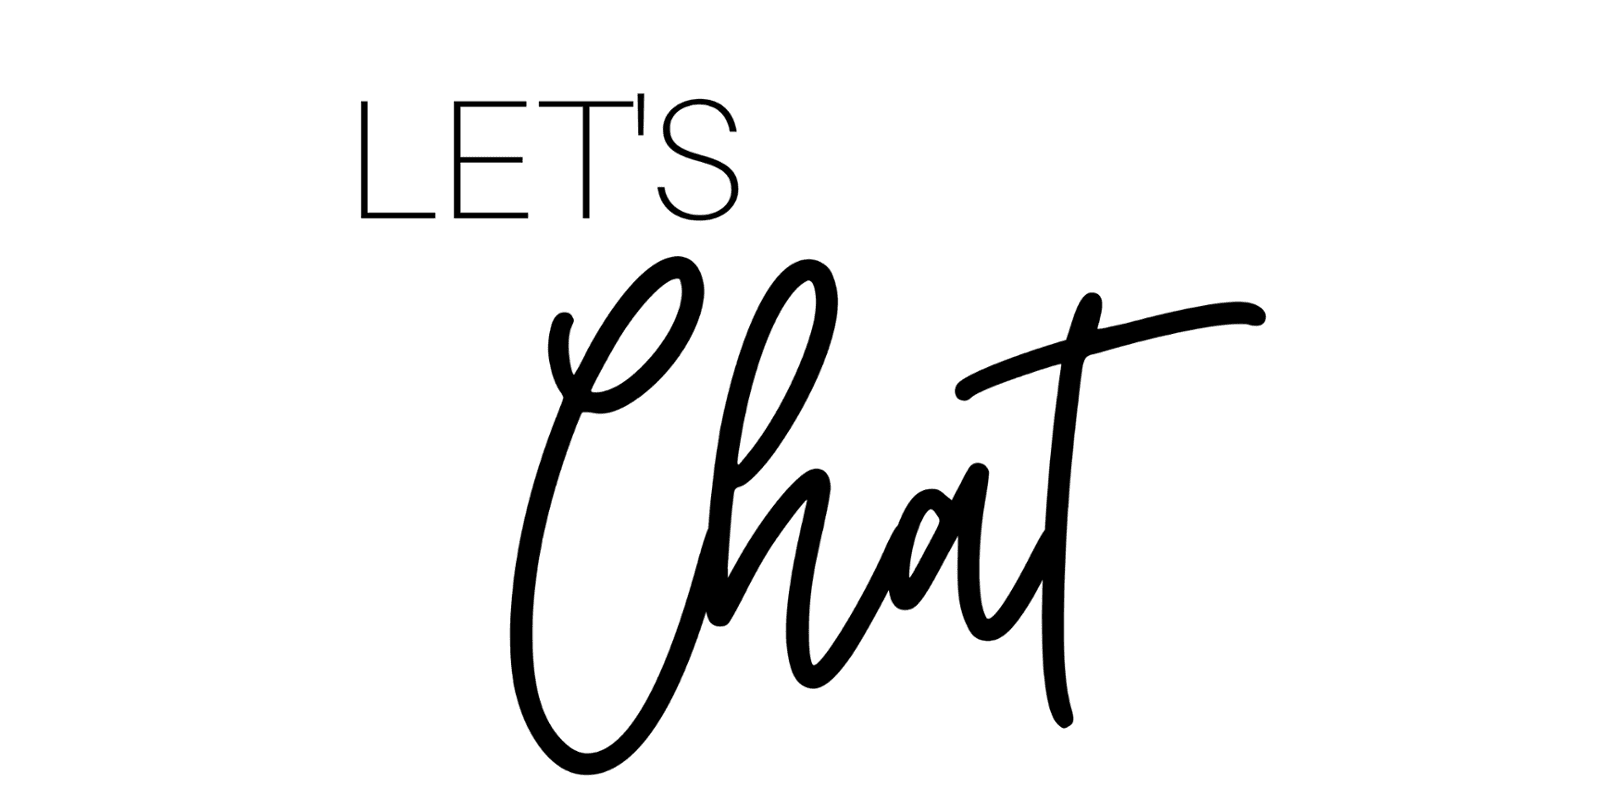 Let's Chat